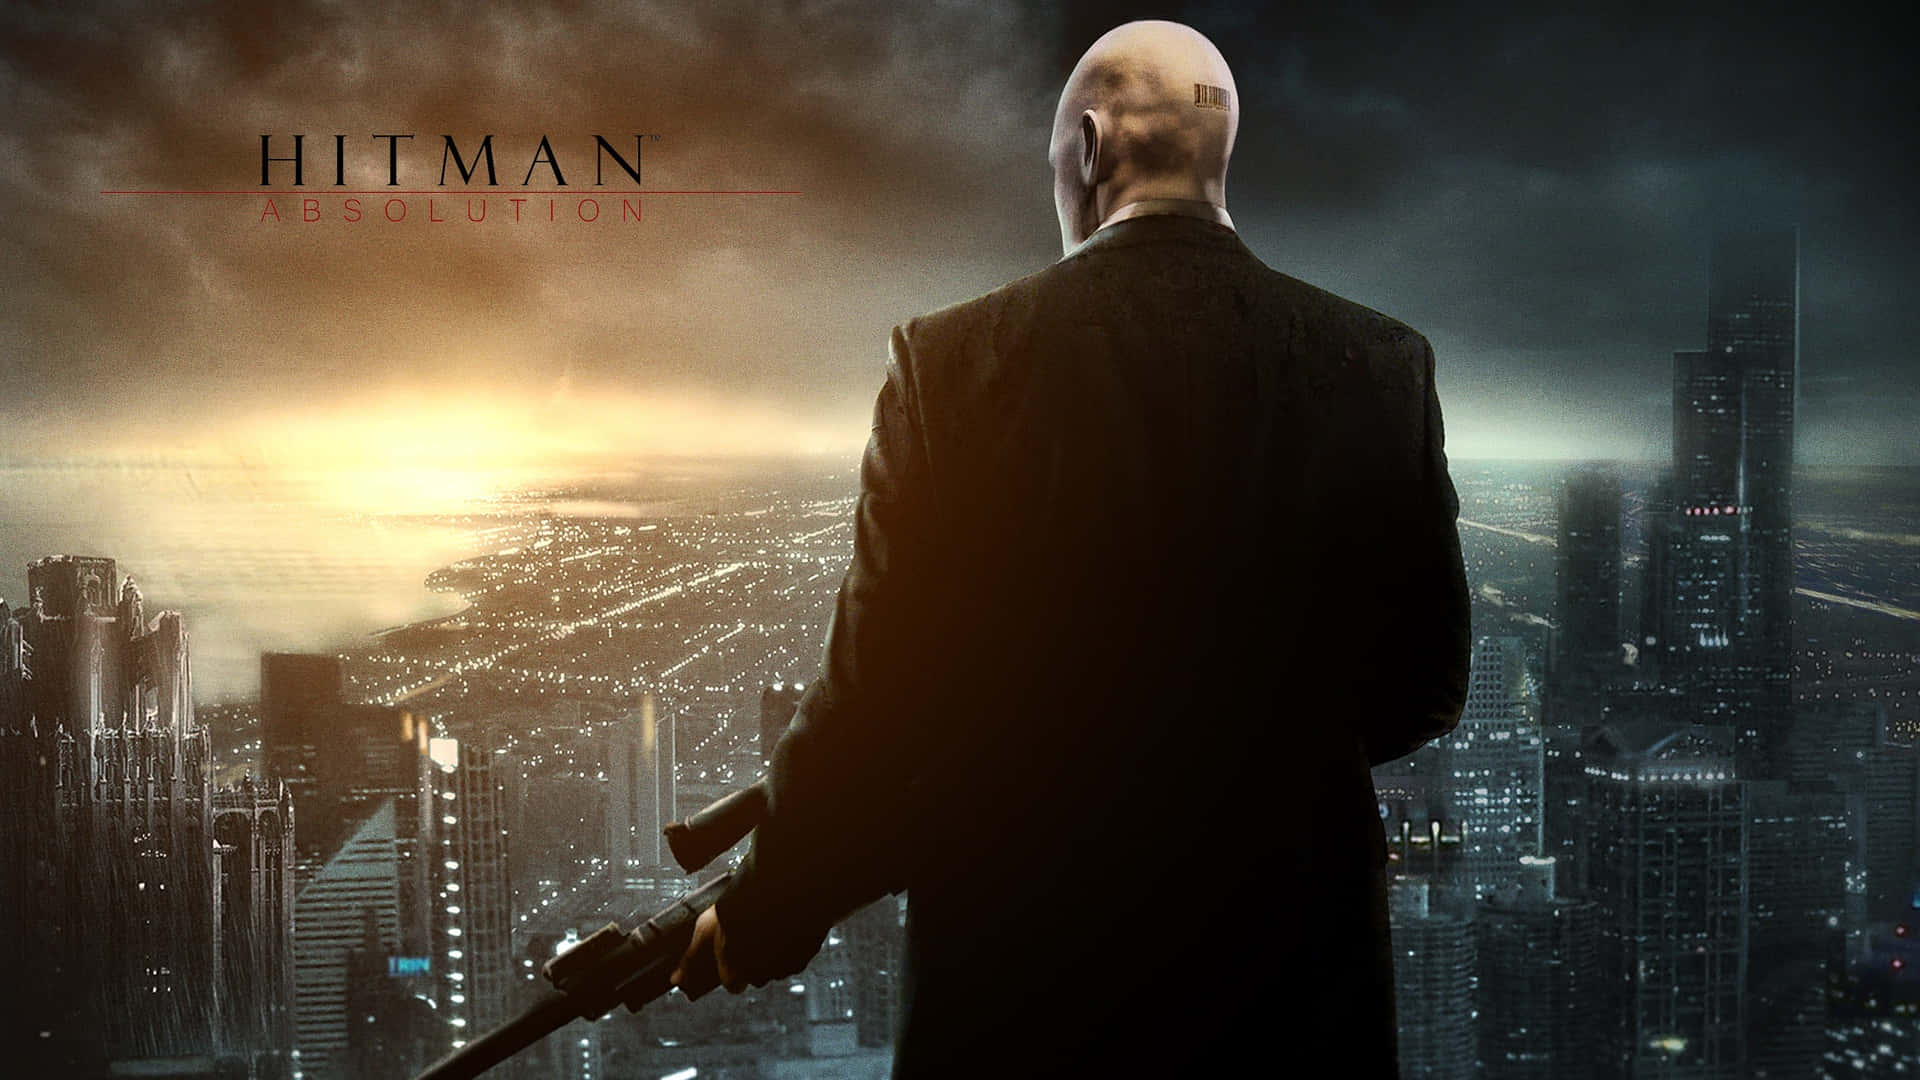 Take on the role of Agent 47 in the riveting stealth action game ‘Hitman Absolution’.